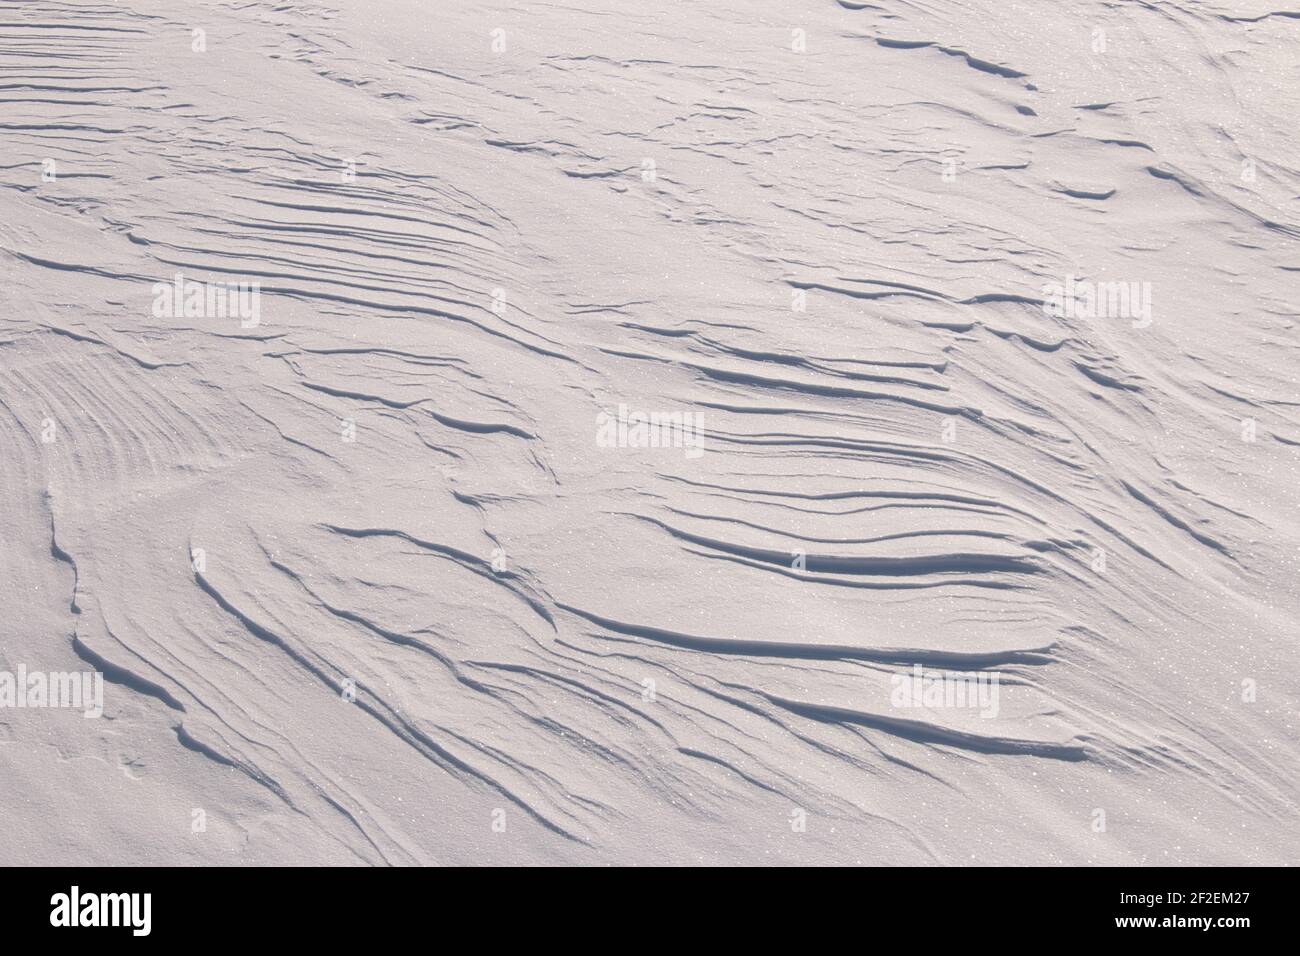 Random patterns in sparkling white snow created by the wind Stock Photo